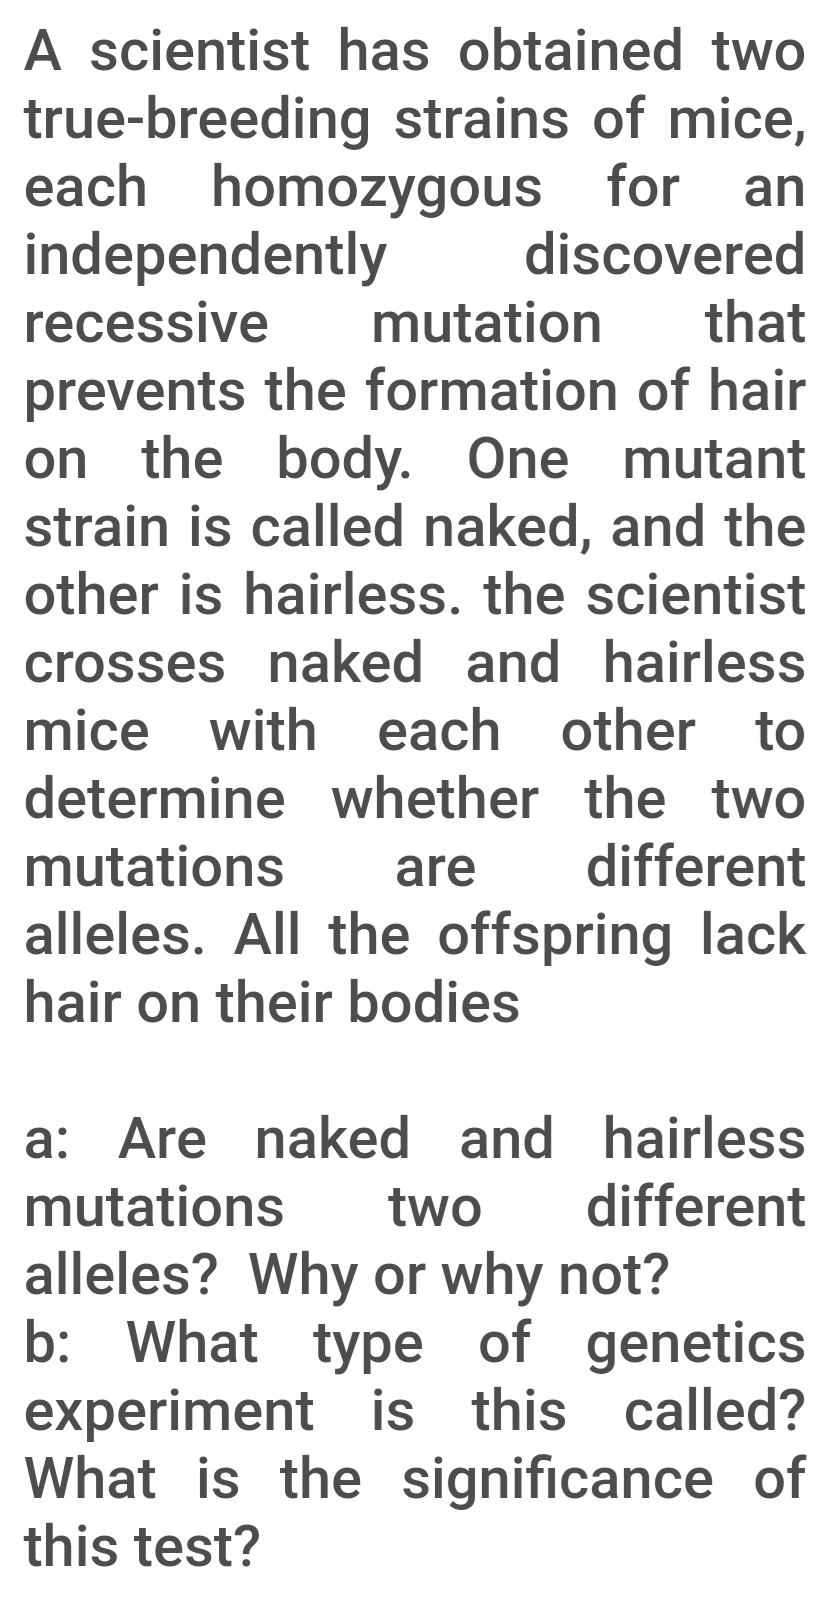 A scientist has obtained two
true-breeding strains of mice,
each homozygous for an
independently
recessive
discovered
mutation
that
prevents the formation of hair
on the body. One mutant
strain is called naked, and the
other is hairless. the scientist
crosses naked and hairless
mice with each other to
determine whether the two
mutations
are
different
alleles. All the offspring lack
hair on their bodies
a: Are naked and hairless
different
mutations
two
alleles? Why or why not?
b: What type of genetics
experiment is this called?
What is the significance of
this test?
